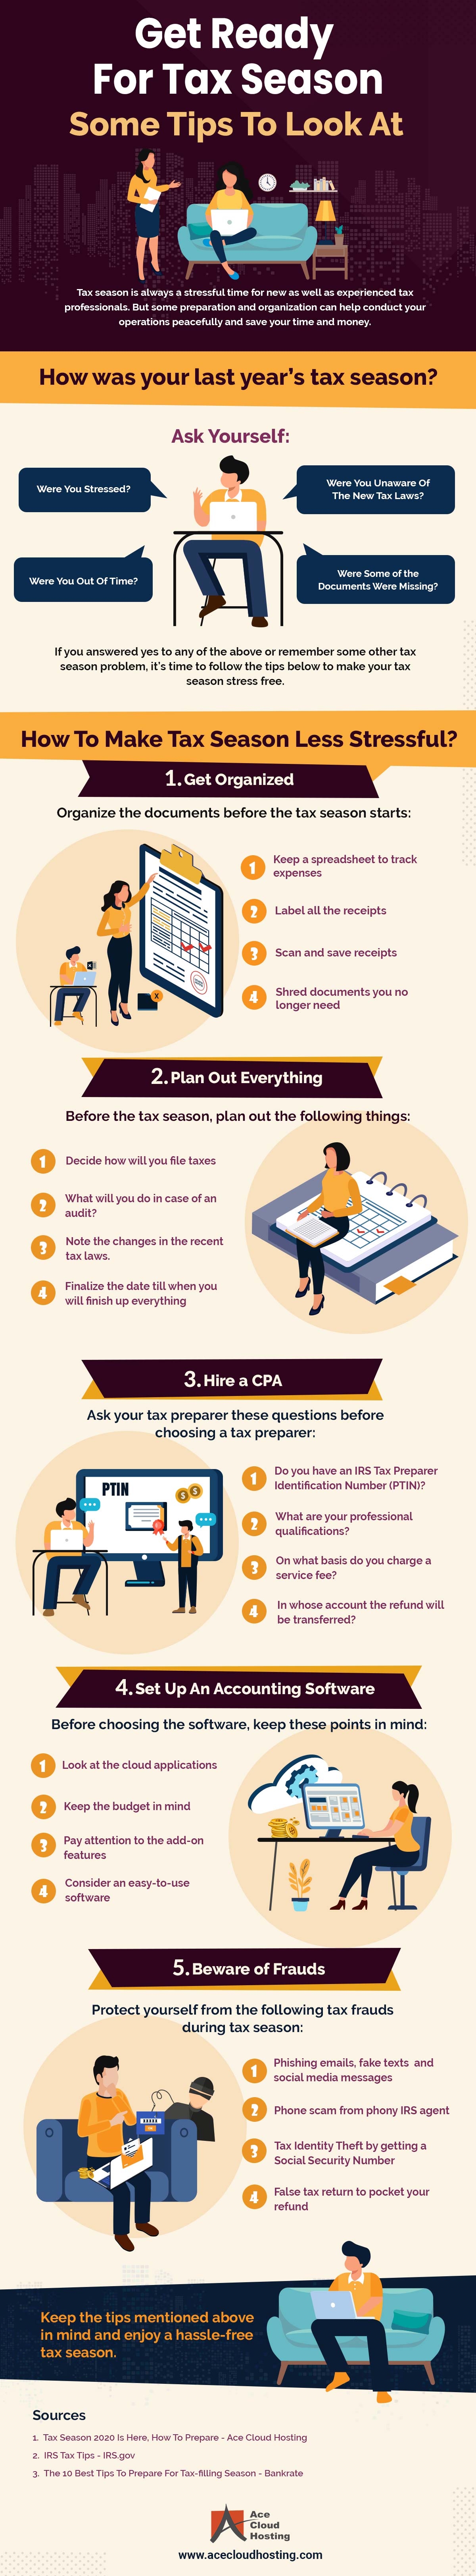 [Infographic] 5 Tips to Get Ready for Tax Season Now